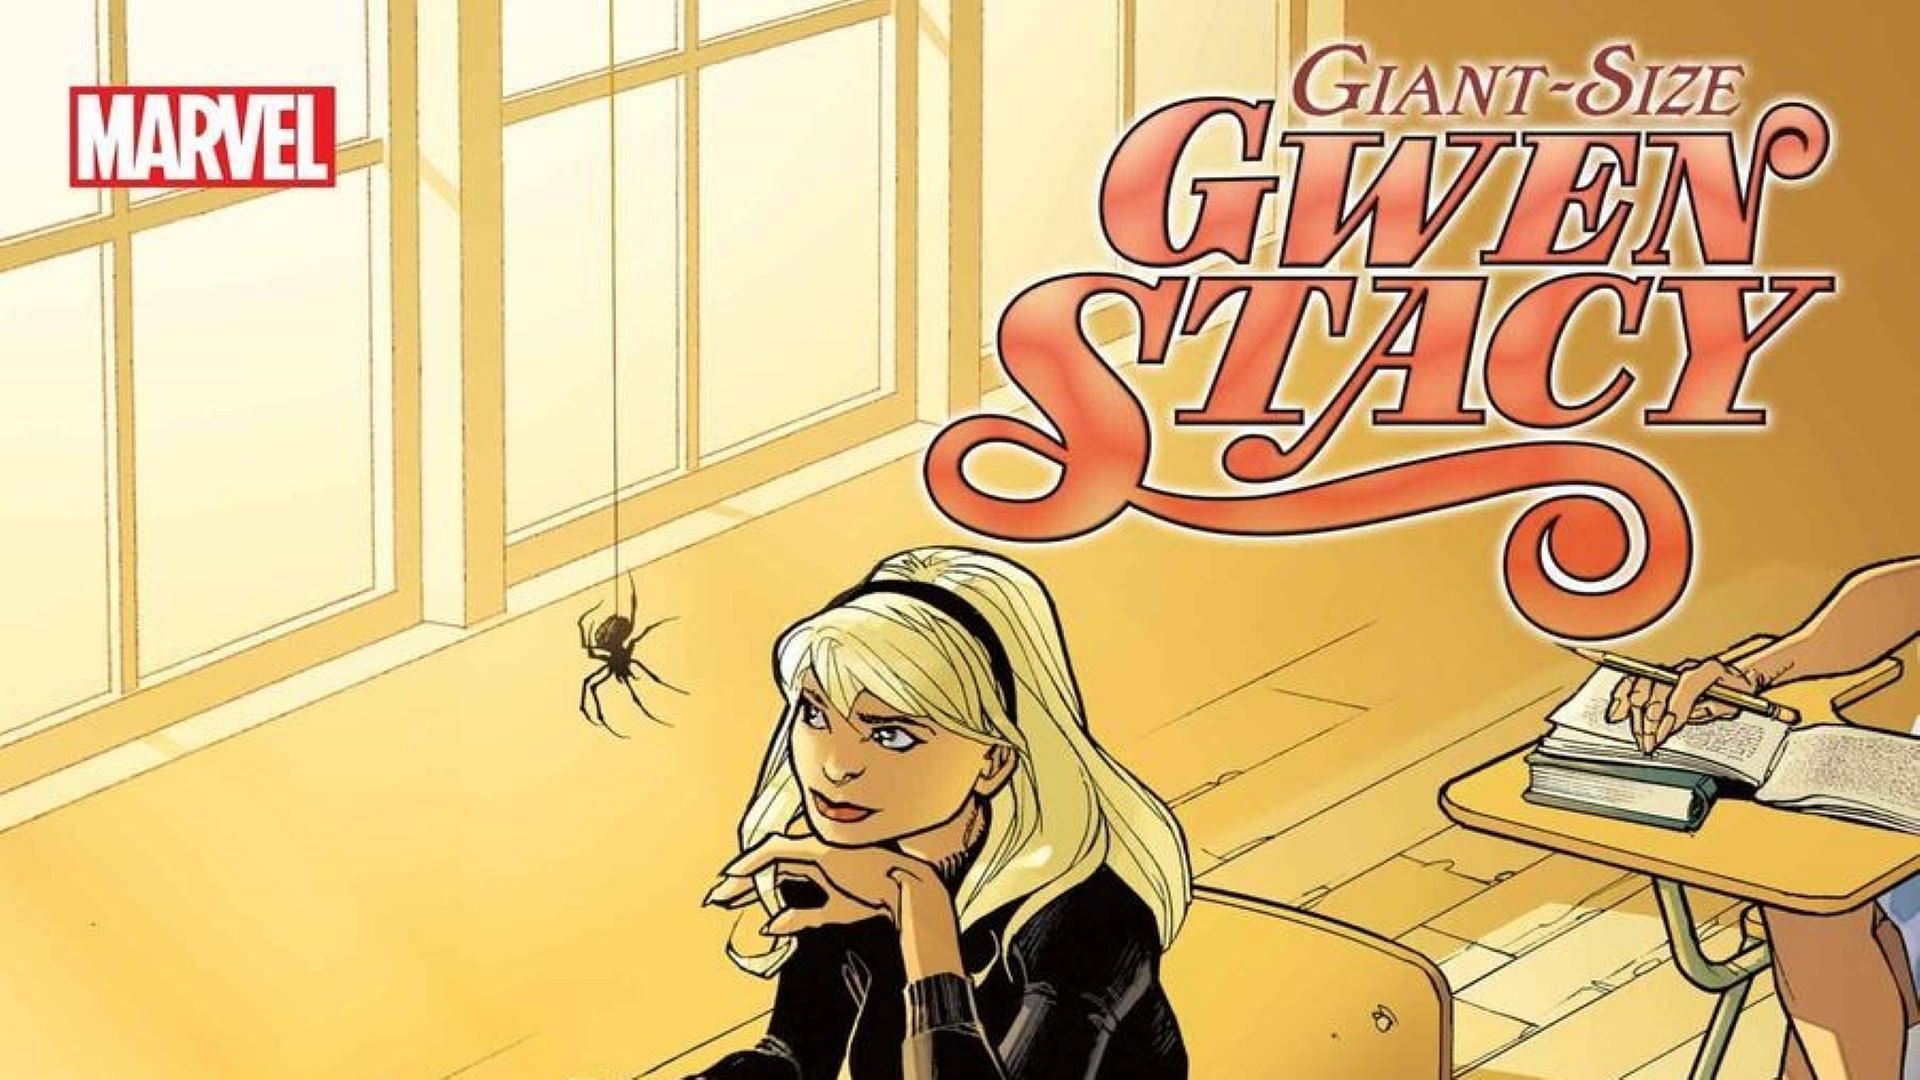 Giant-Size Gwen Stacy #1 will hit shelves in August (Image via Marvel)